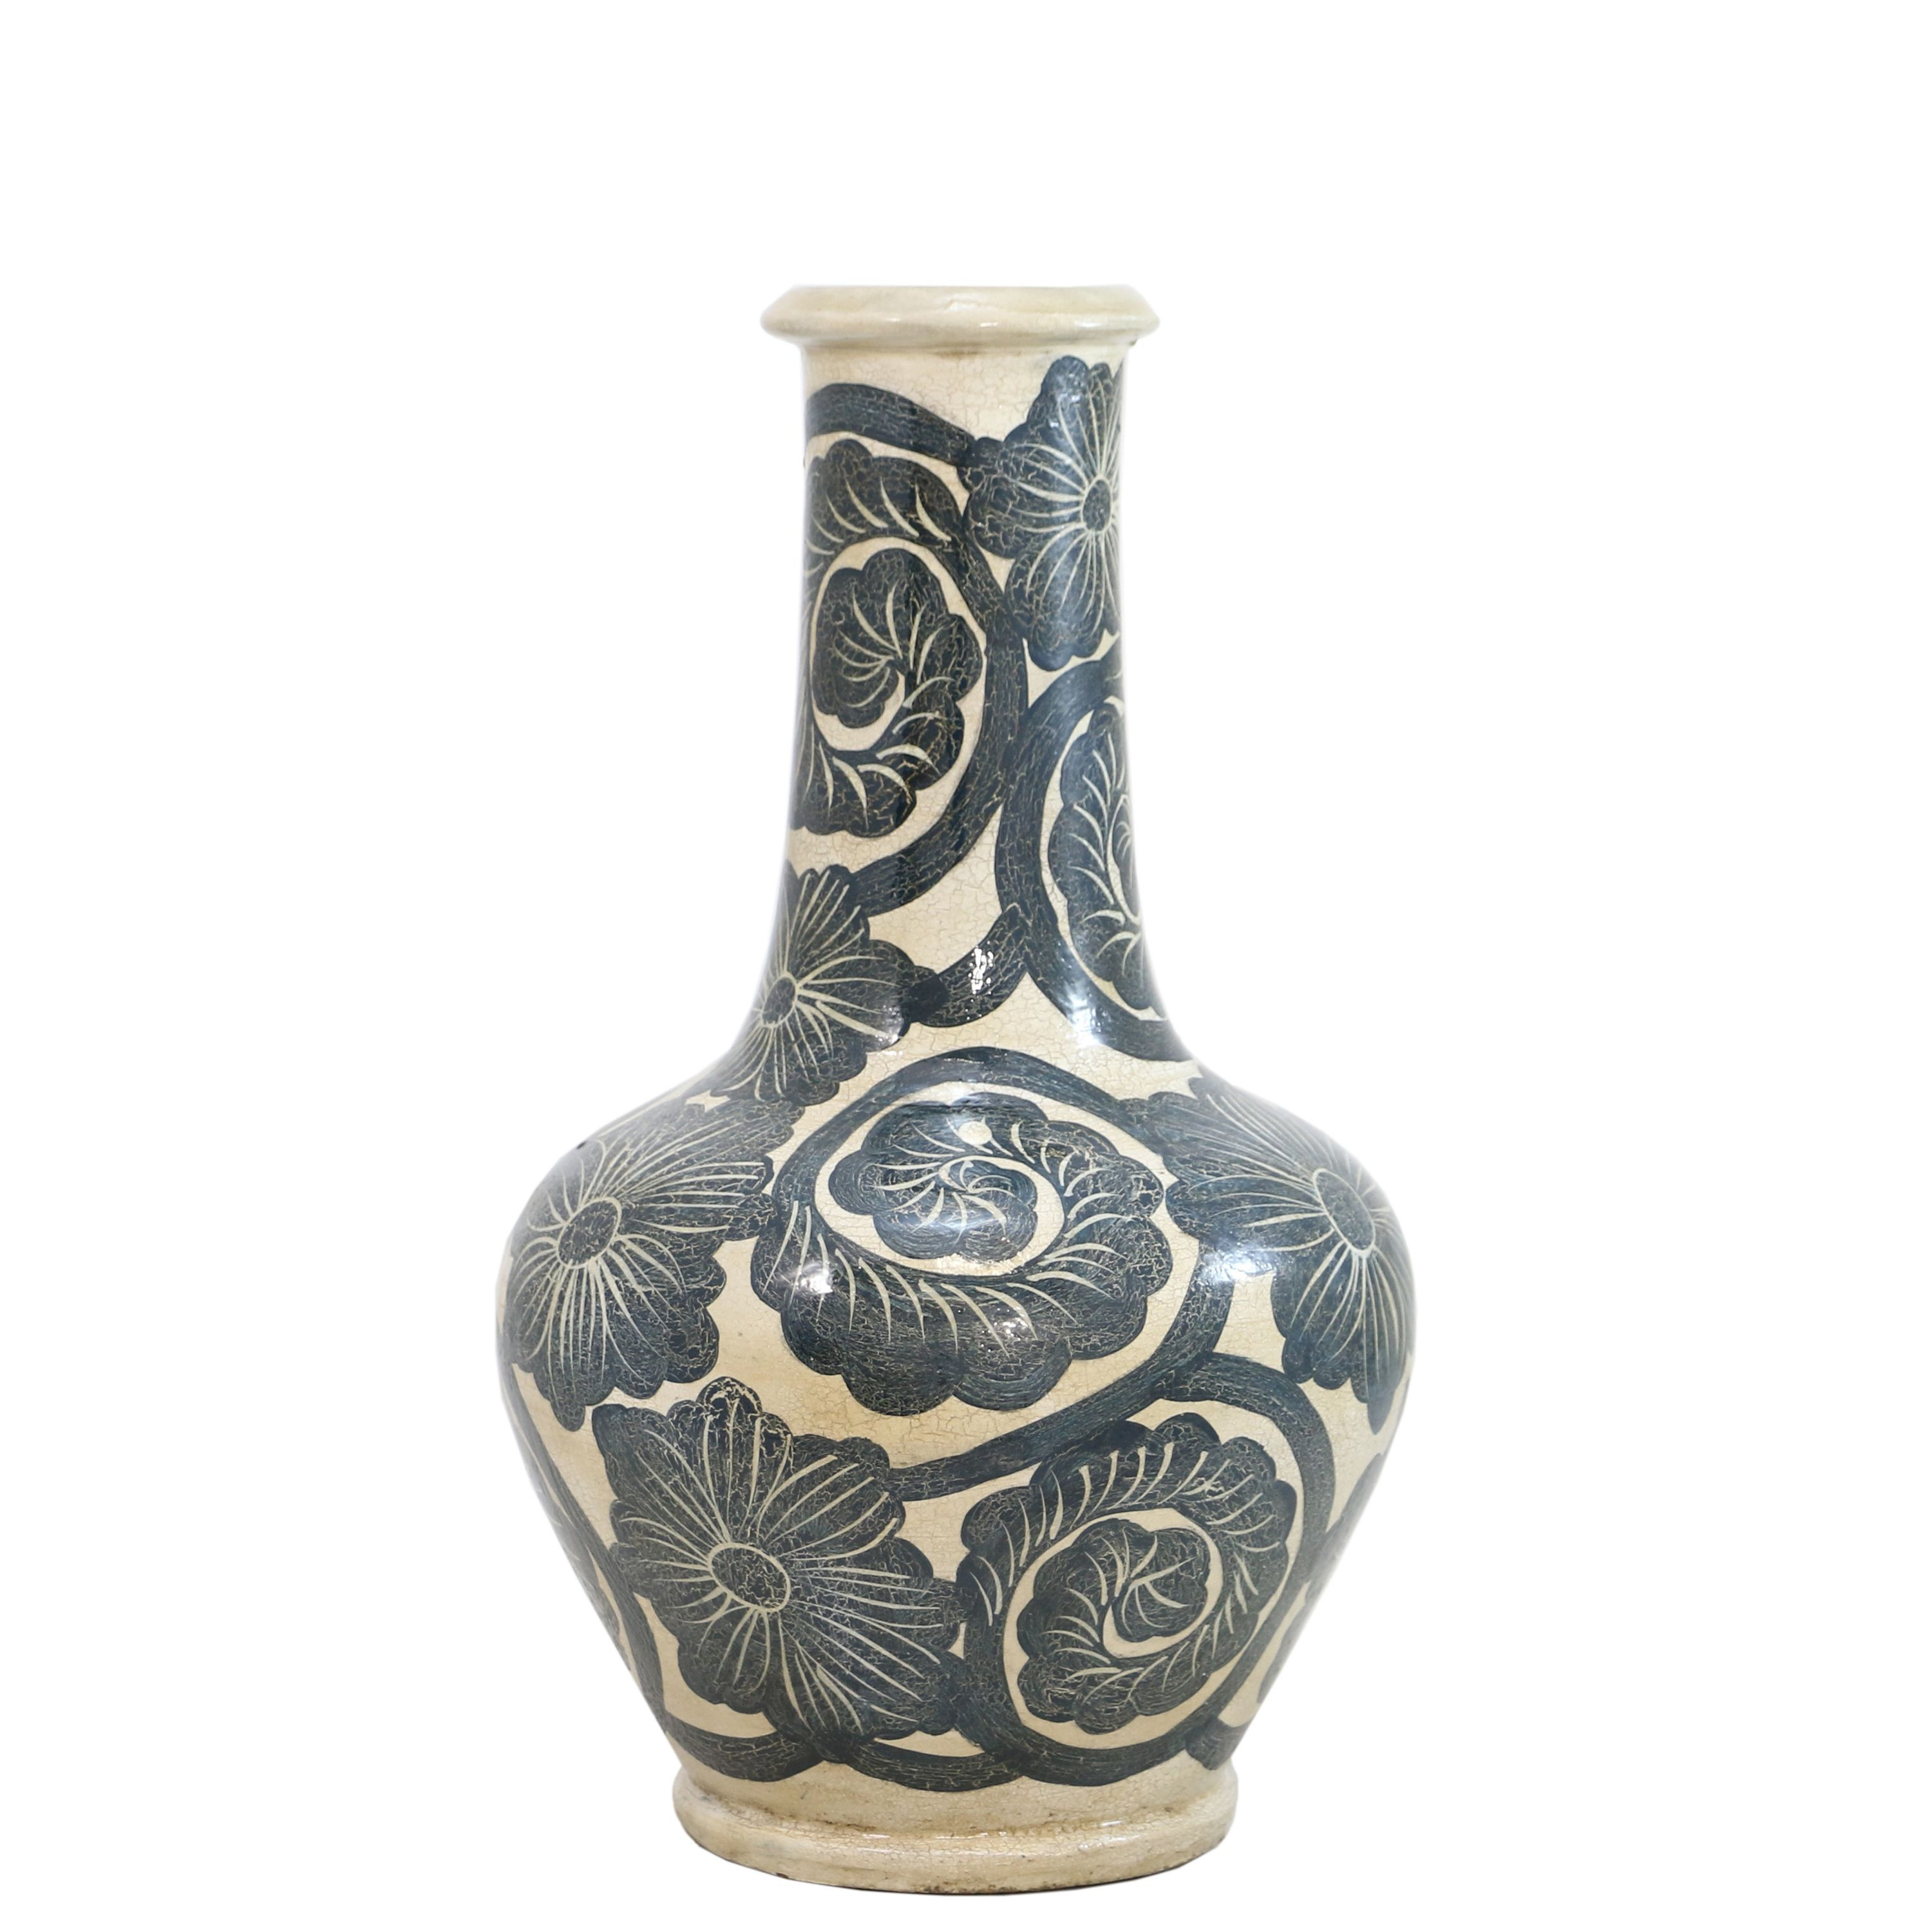 28 Lovable Blue and White Vases wholesale 2024 free download blue and white vases wholesale of importcollection item 29 939 thalia vase 2016 new collections inside importcollection item 29 939 thalia vase